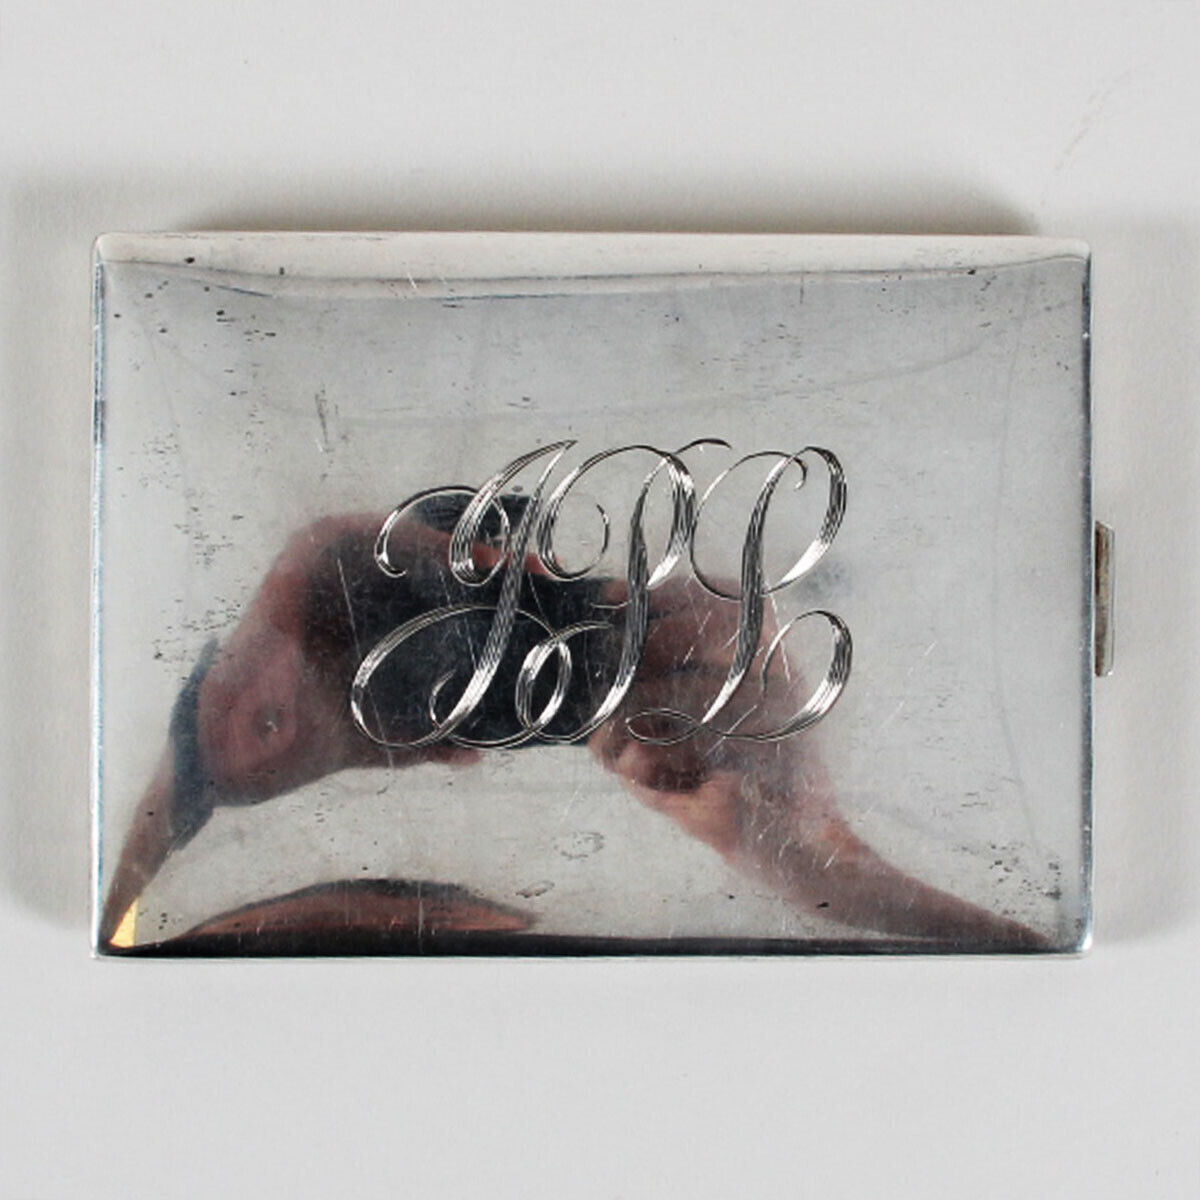 Jerry Lewis\' silver ciggarette case. A holiday gift from Gretchen and Lou Brown.